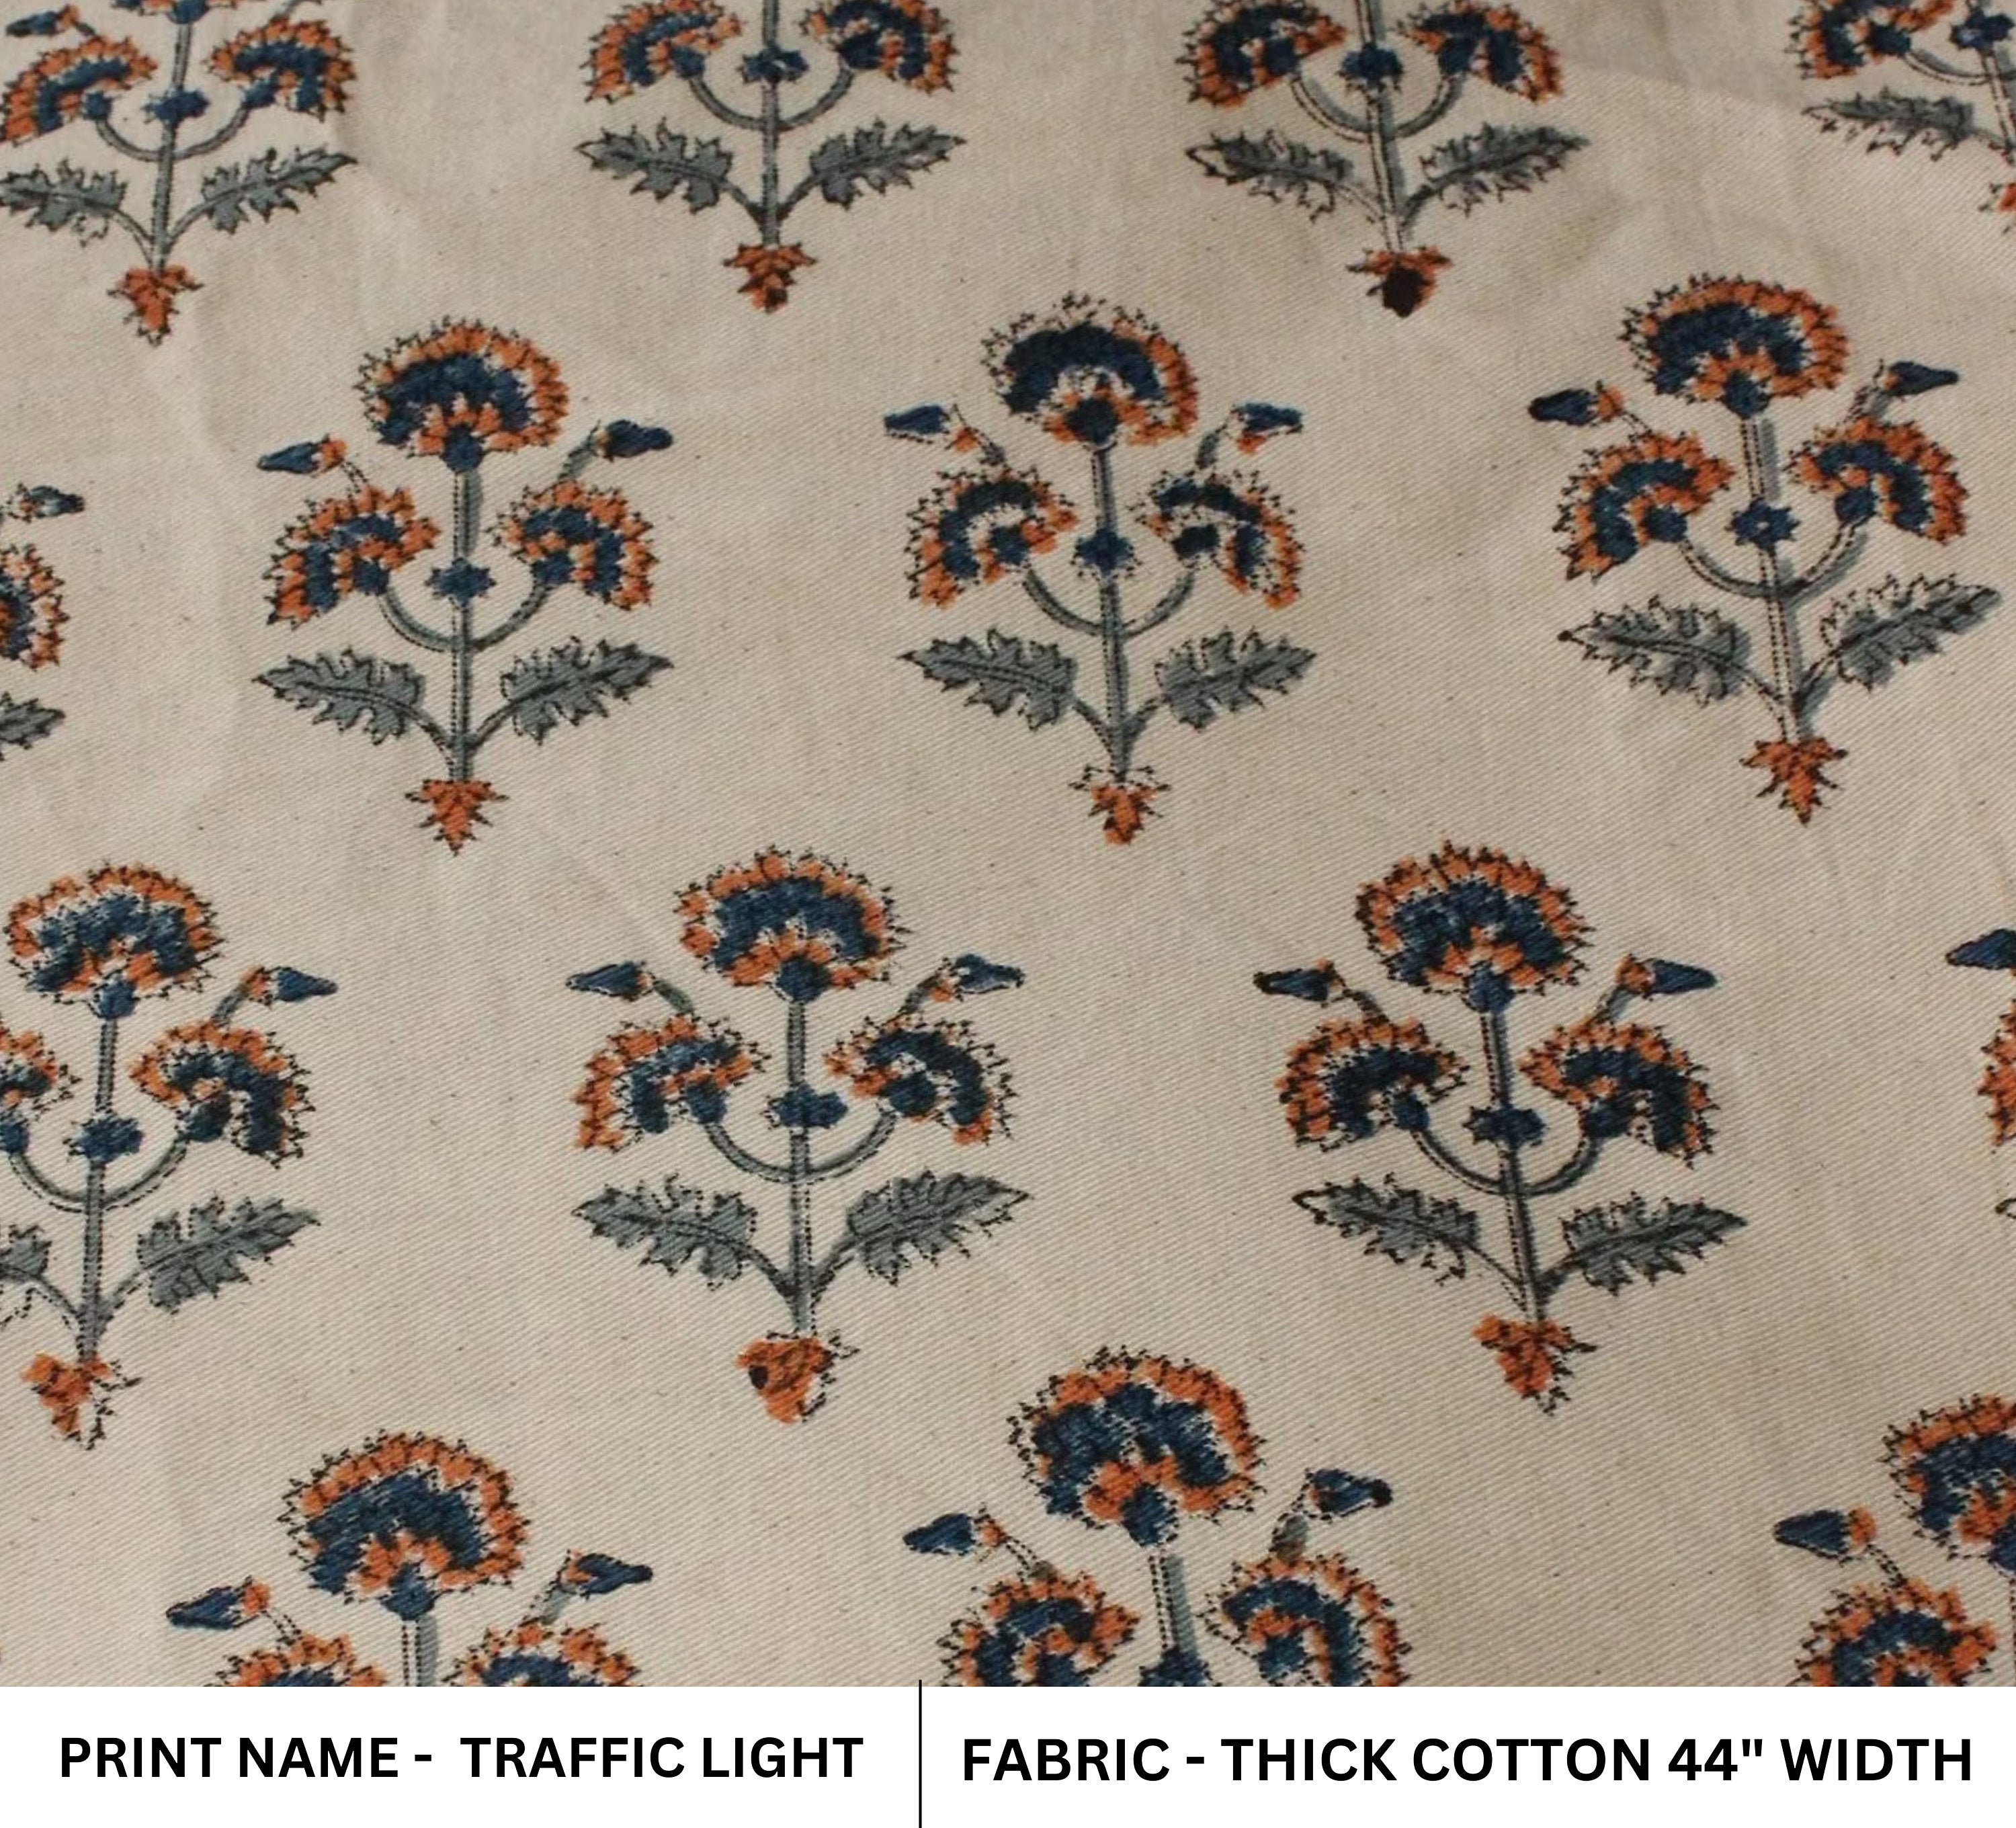 Thick Cotton 44" Wide, Block Print, Handmade, Indian Cushion Cover, Sofa and Table Cloth, Floral Printed - TRAFFIC LIGHT